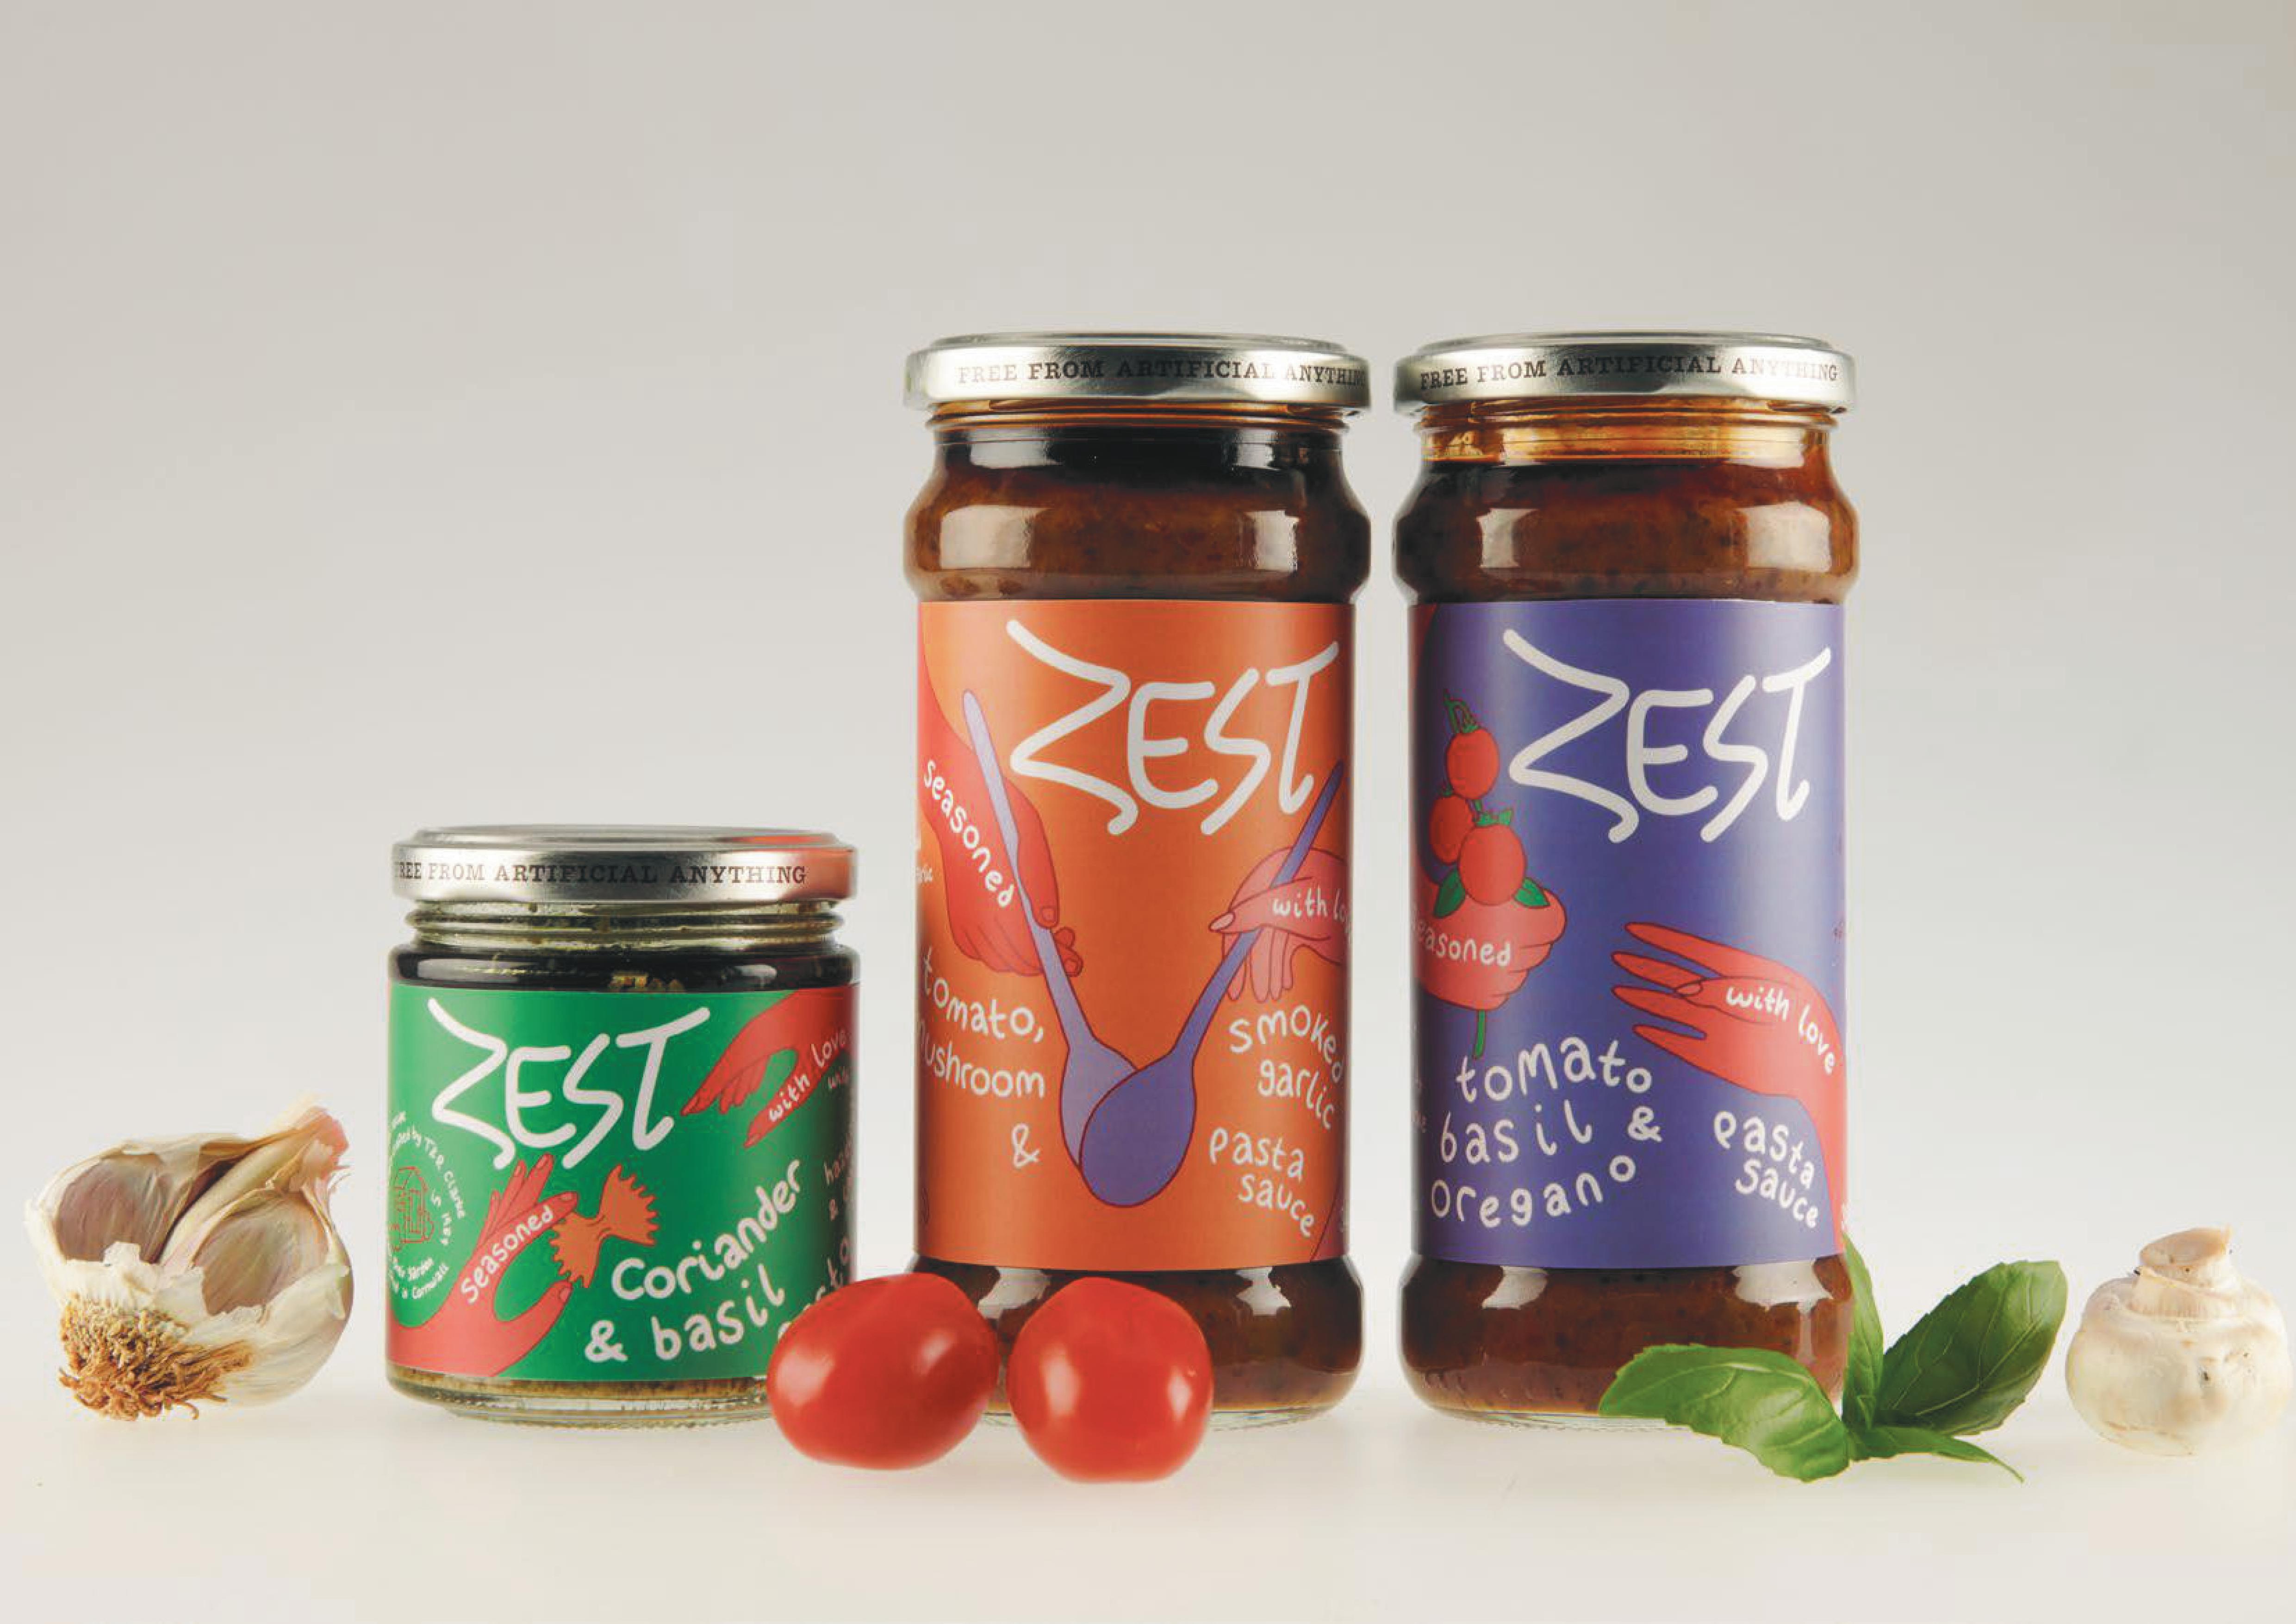 BA Graphic Design work by Niamh Sparrow showing two colourful illustrated hands coming together on three jars of pasta sauces